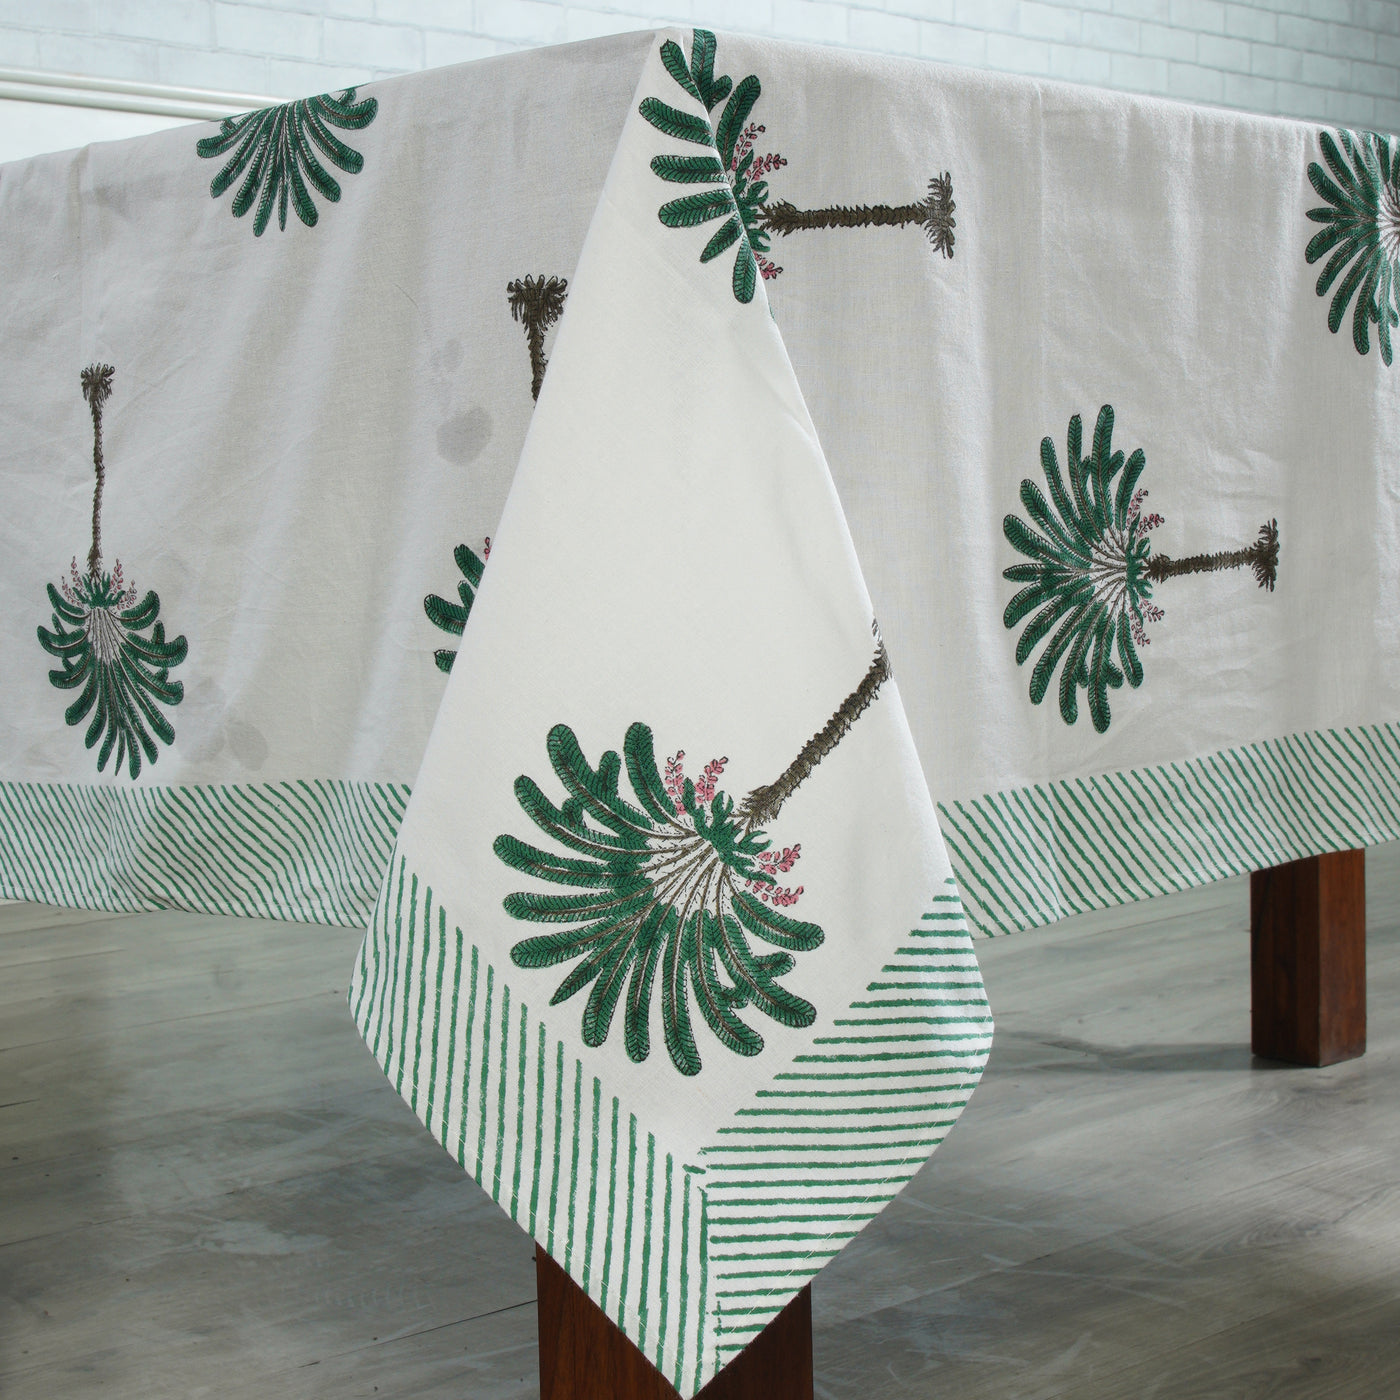 Fabricrush Pine Green and Peanut Brown Print Tablecloth, Palm Tree Print with Green Striped Border, Indian Hand Block Printed Tablecloth